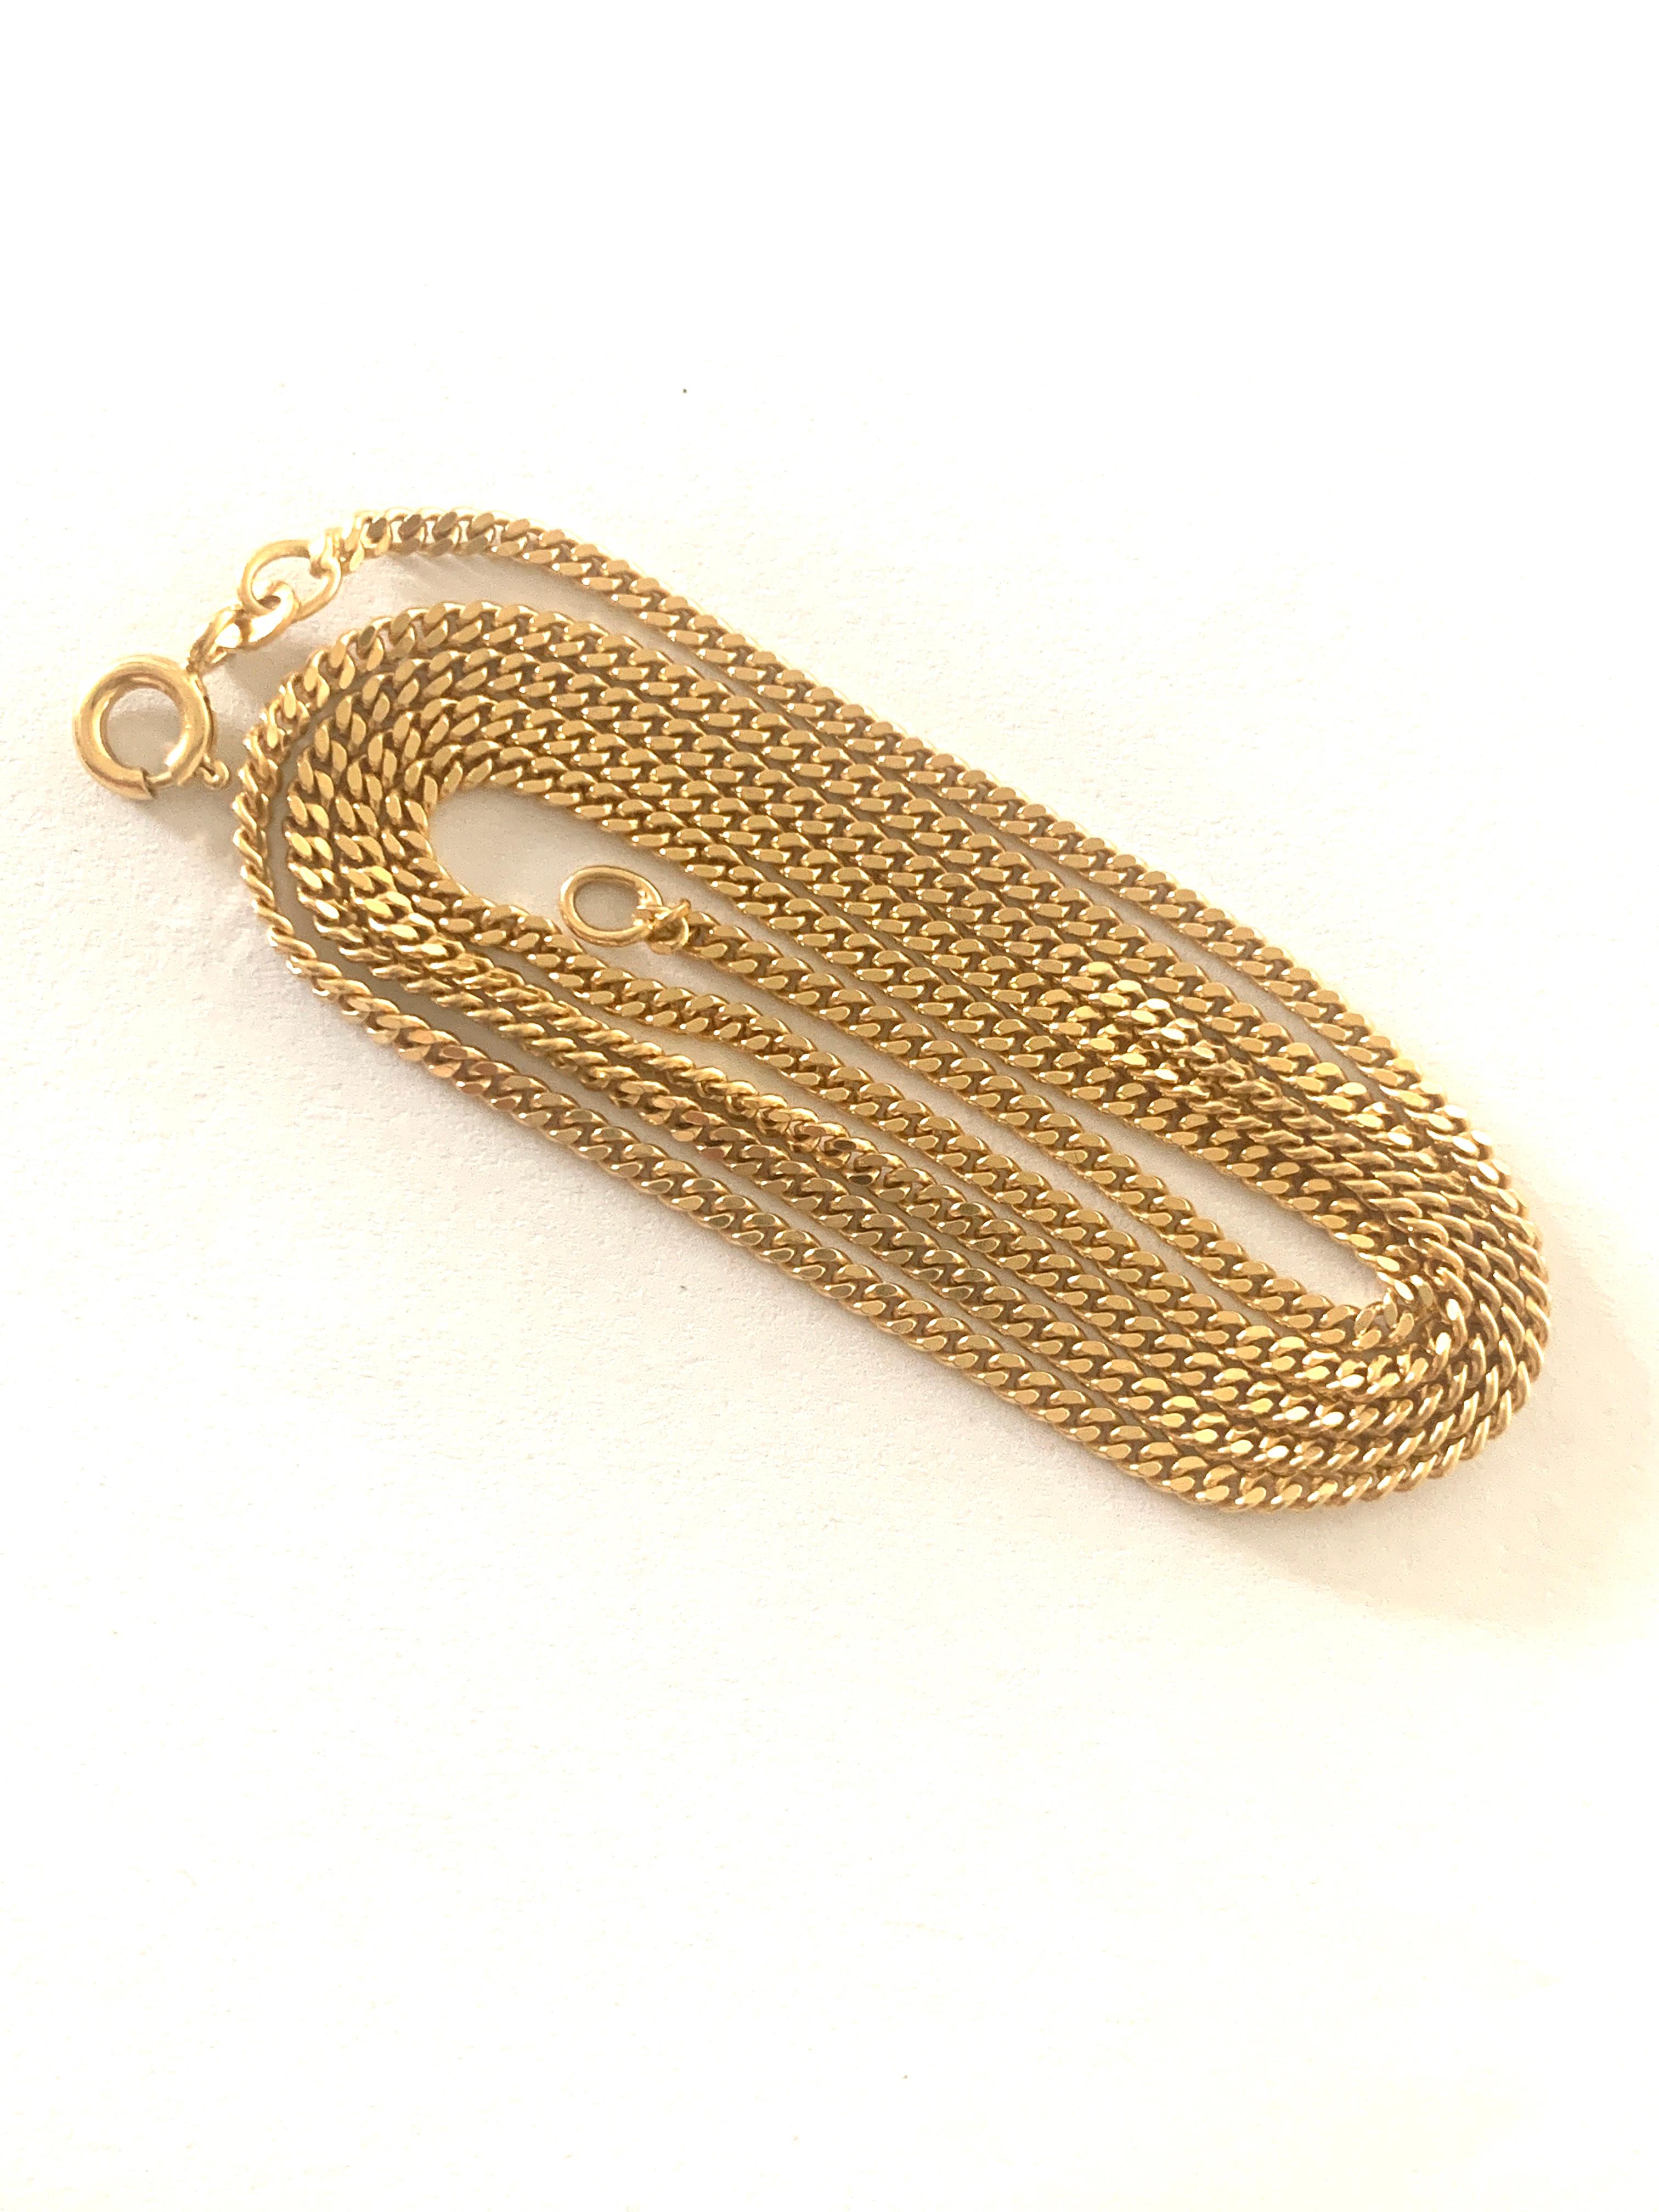 Beautiful
9ct Gold Curb Chain
by Italian Goldsmiths Unoaerre
Circa 1980s
Length 24 Inches
Thickness 2.5 mm
Weight 7.64 grams
Condition : Like New 